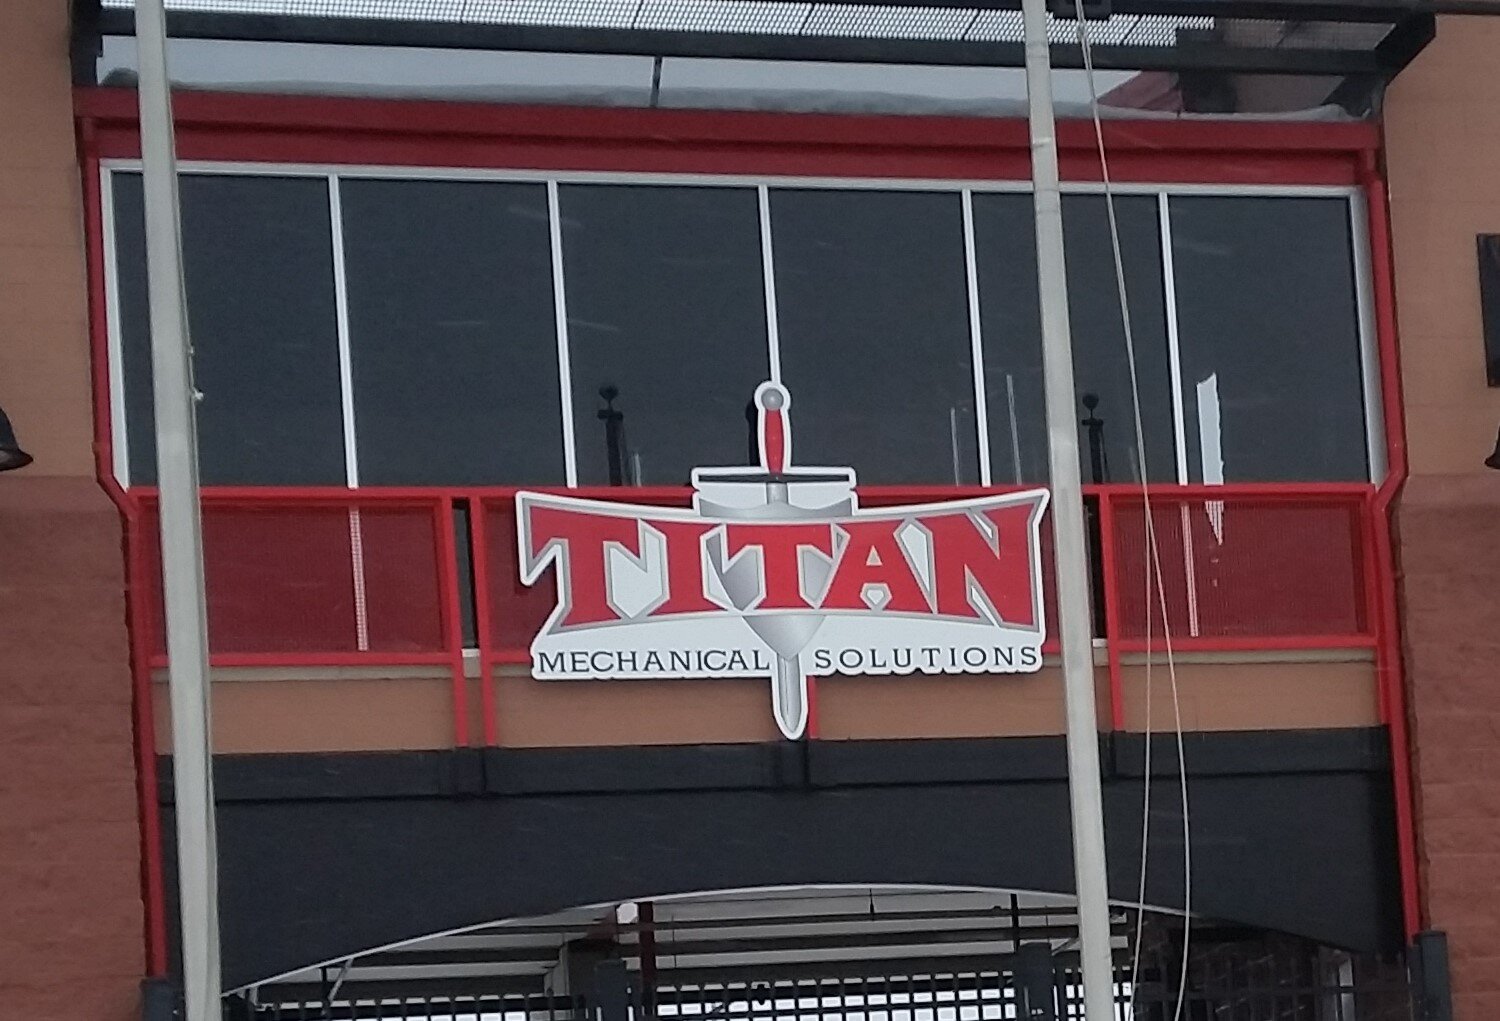 1500081 Florence Freedom- Titan Mechanical- front sign addition (1).jpg